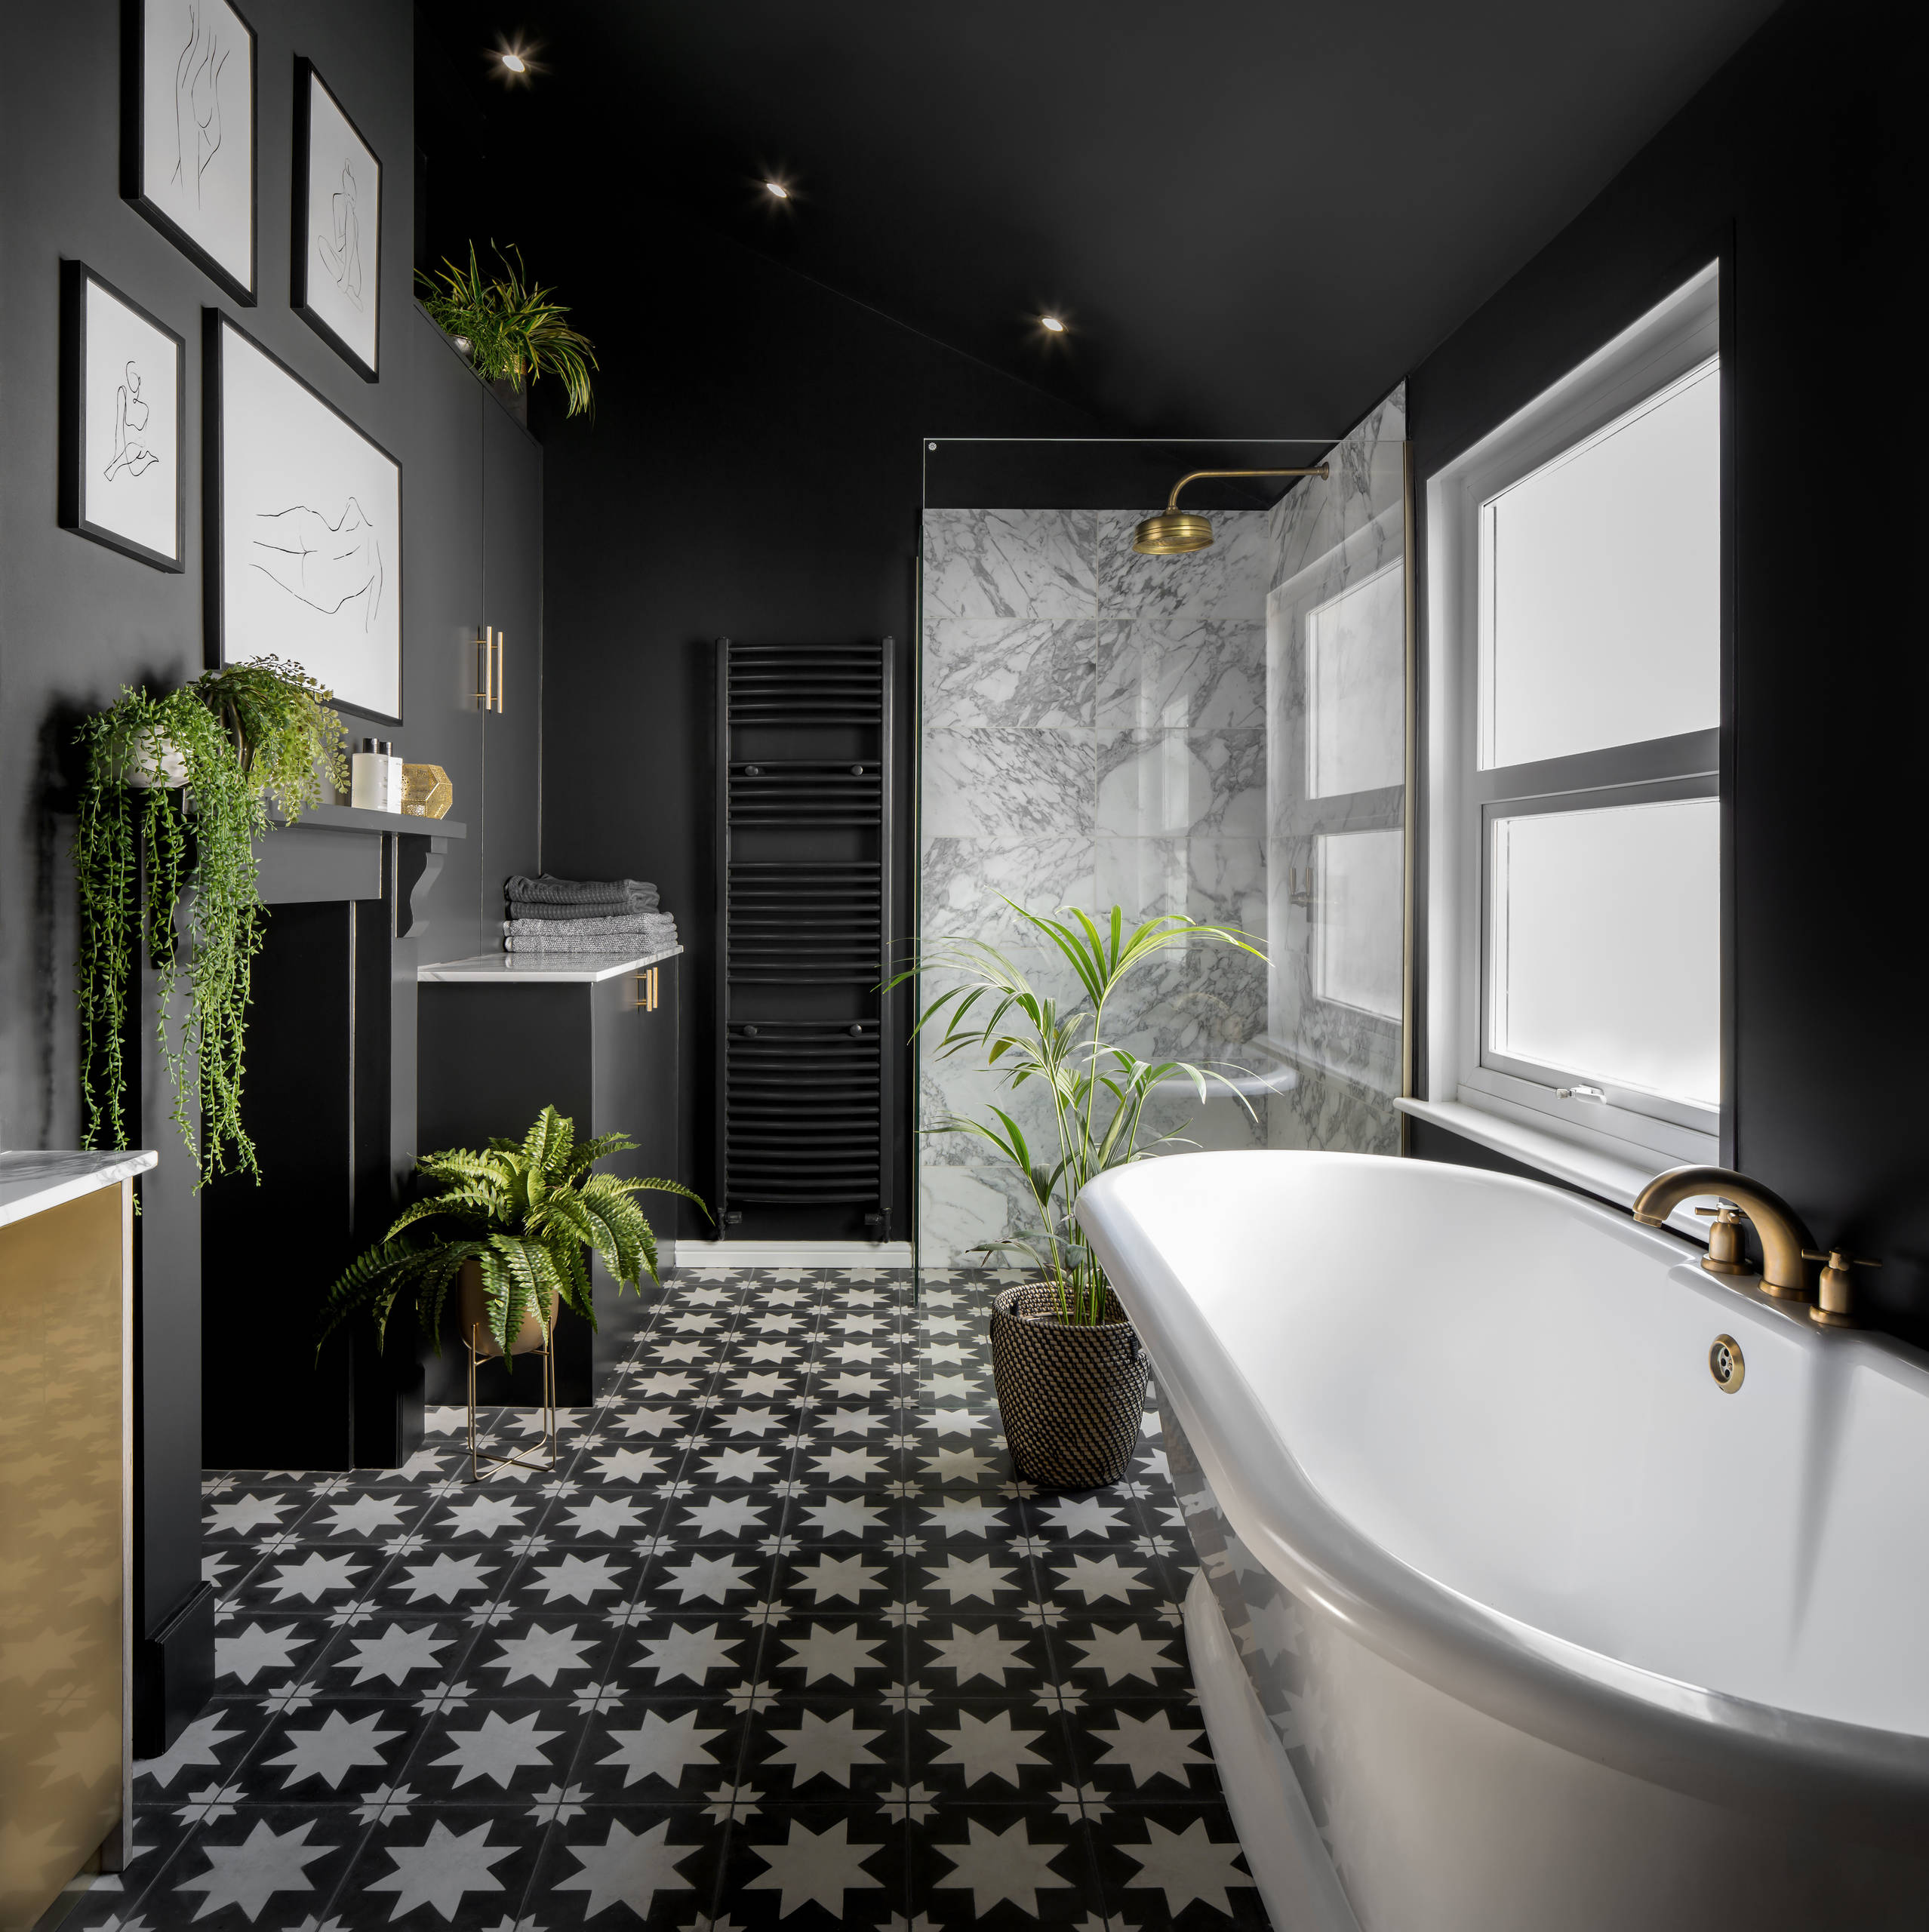 Cost Of Your Bathroom Renovation, How Much Does It Cost To Renovate A Small Bathroom Uk